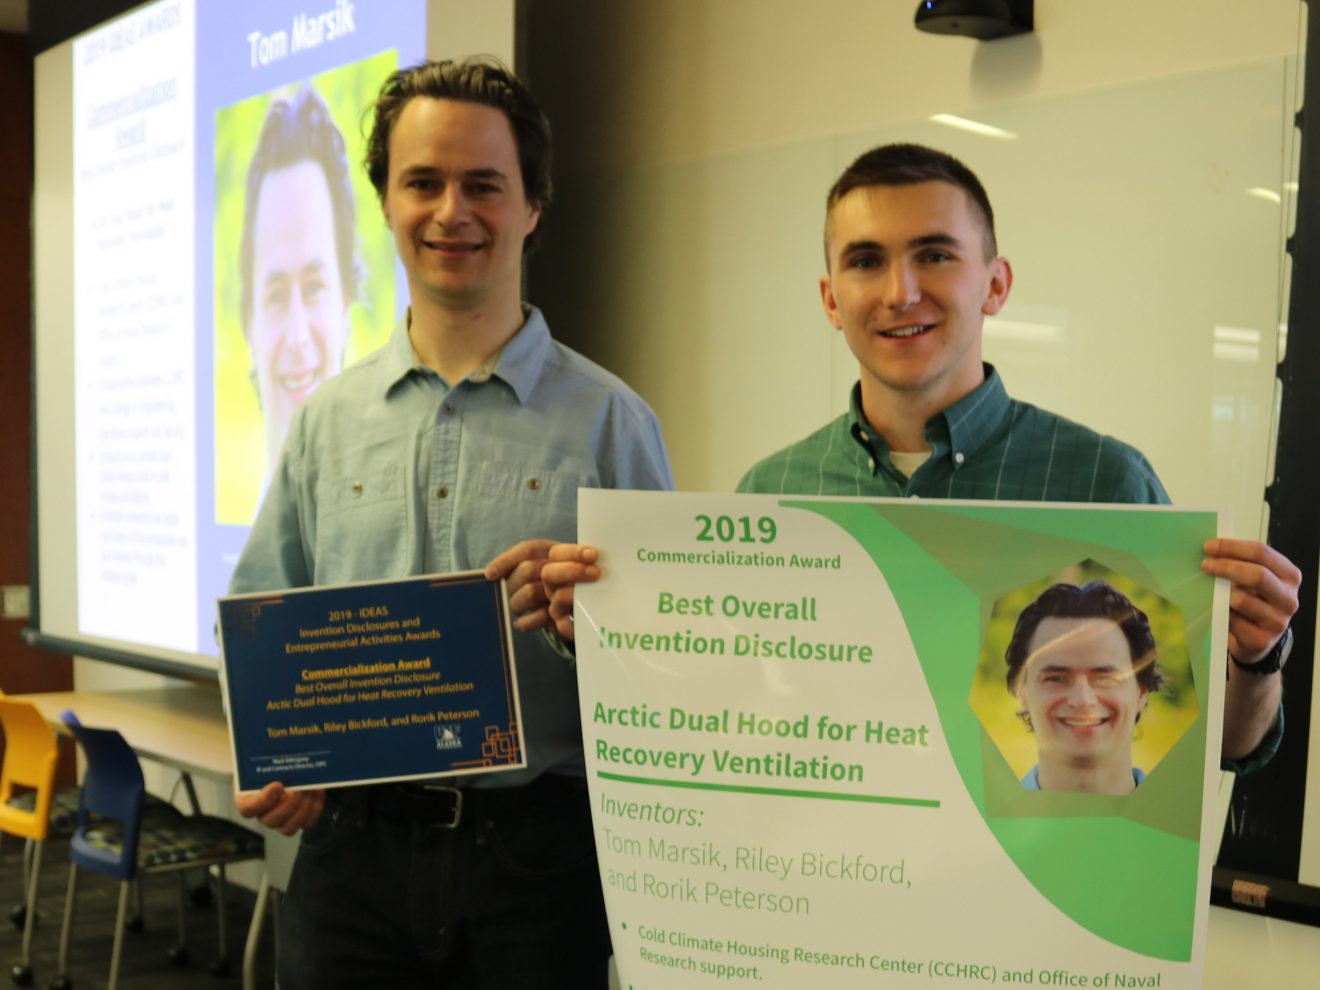 Two man stand holding an award certificate and a poster. They are in a classroom.